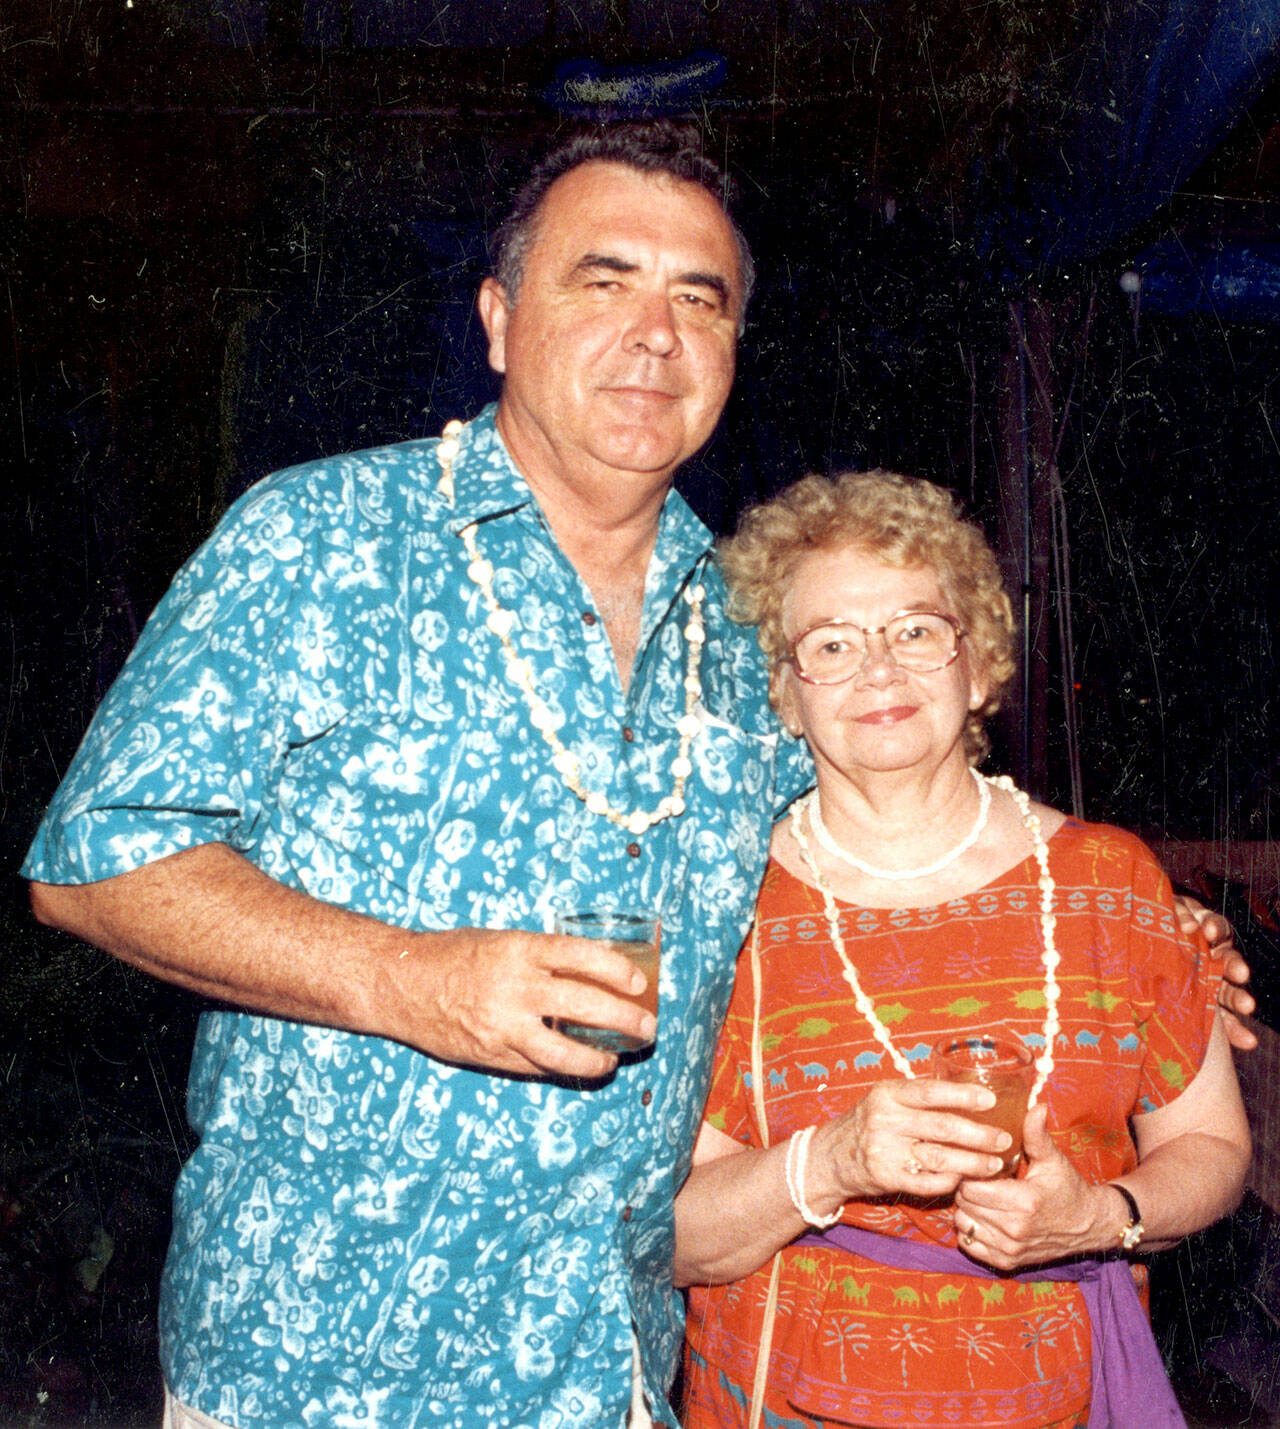 Chuck and Irene Lukey, pictured in 1990, first met circa 1955 outside Port Angeles’ Lincoln Theater, and they married soon after. (Photo courtesy of Mark Lukey)